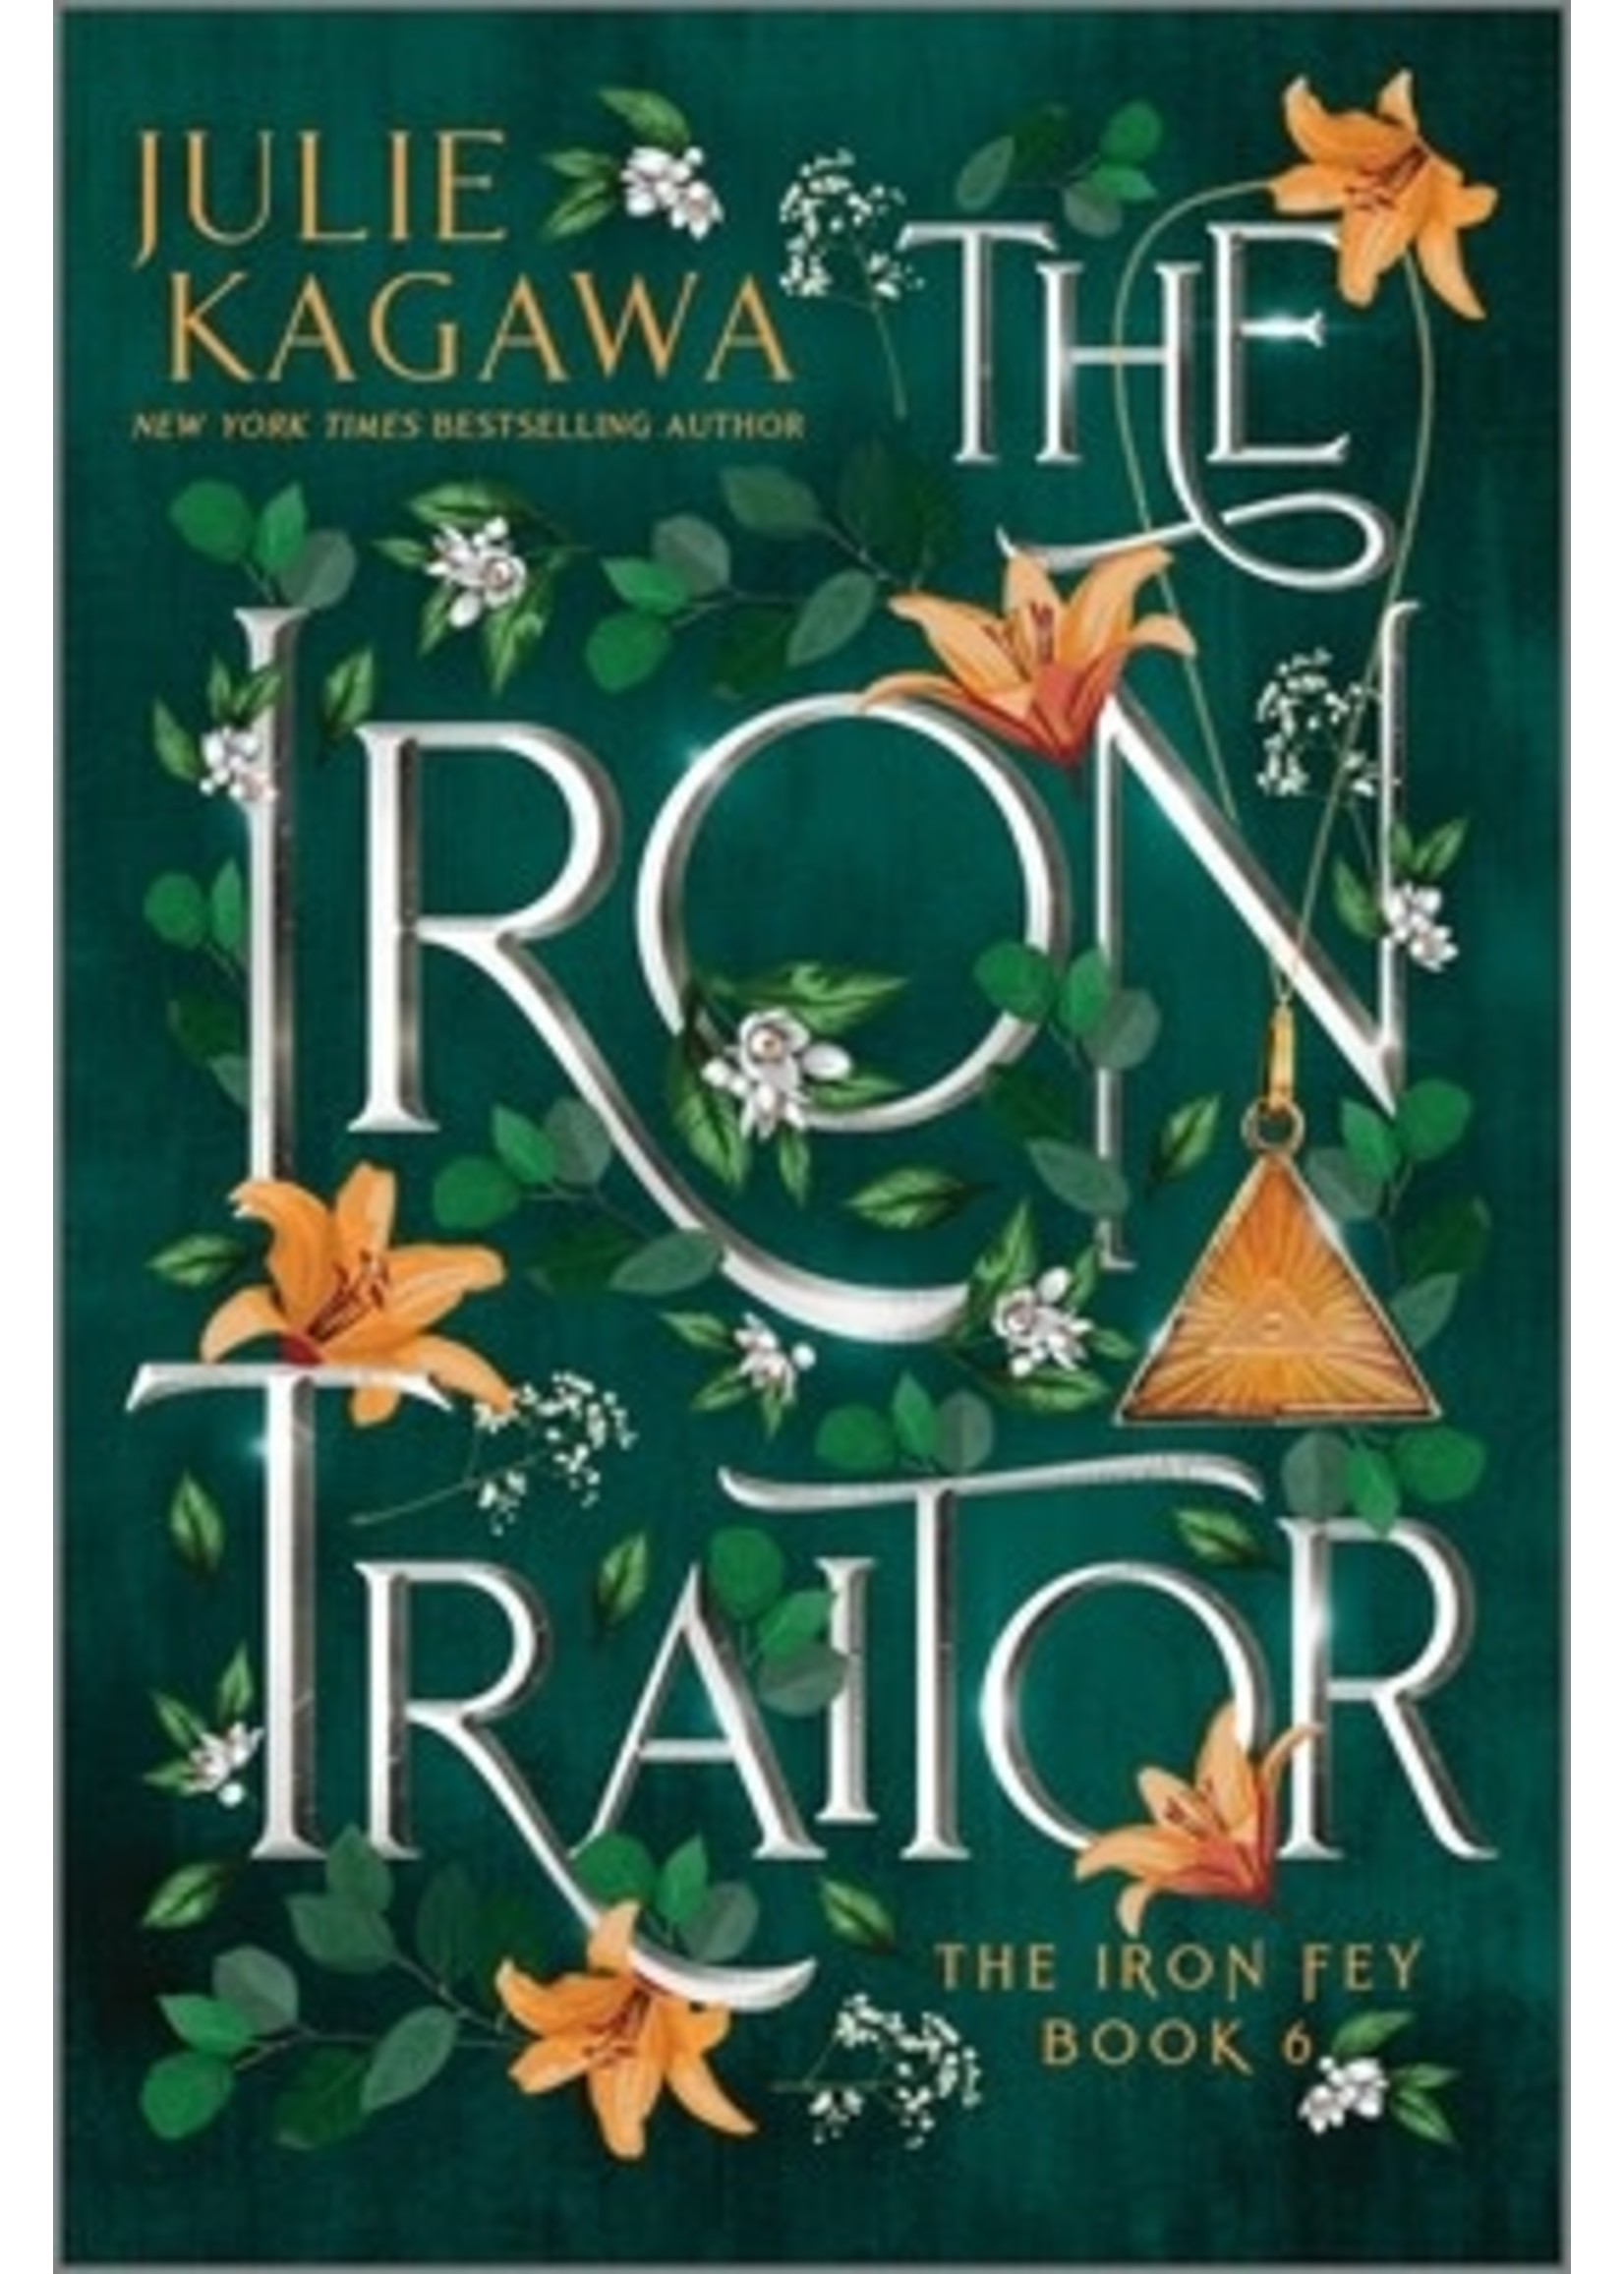 The Iron Traitor Special Edition (The Iron Fey: Call of the Forgotten #2) by Julie Kagawa